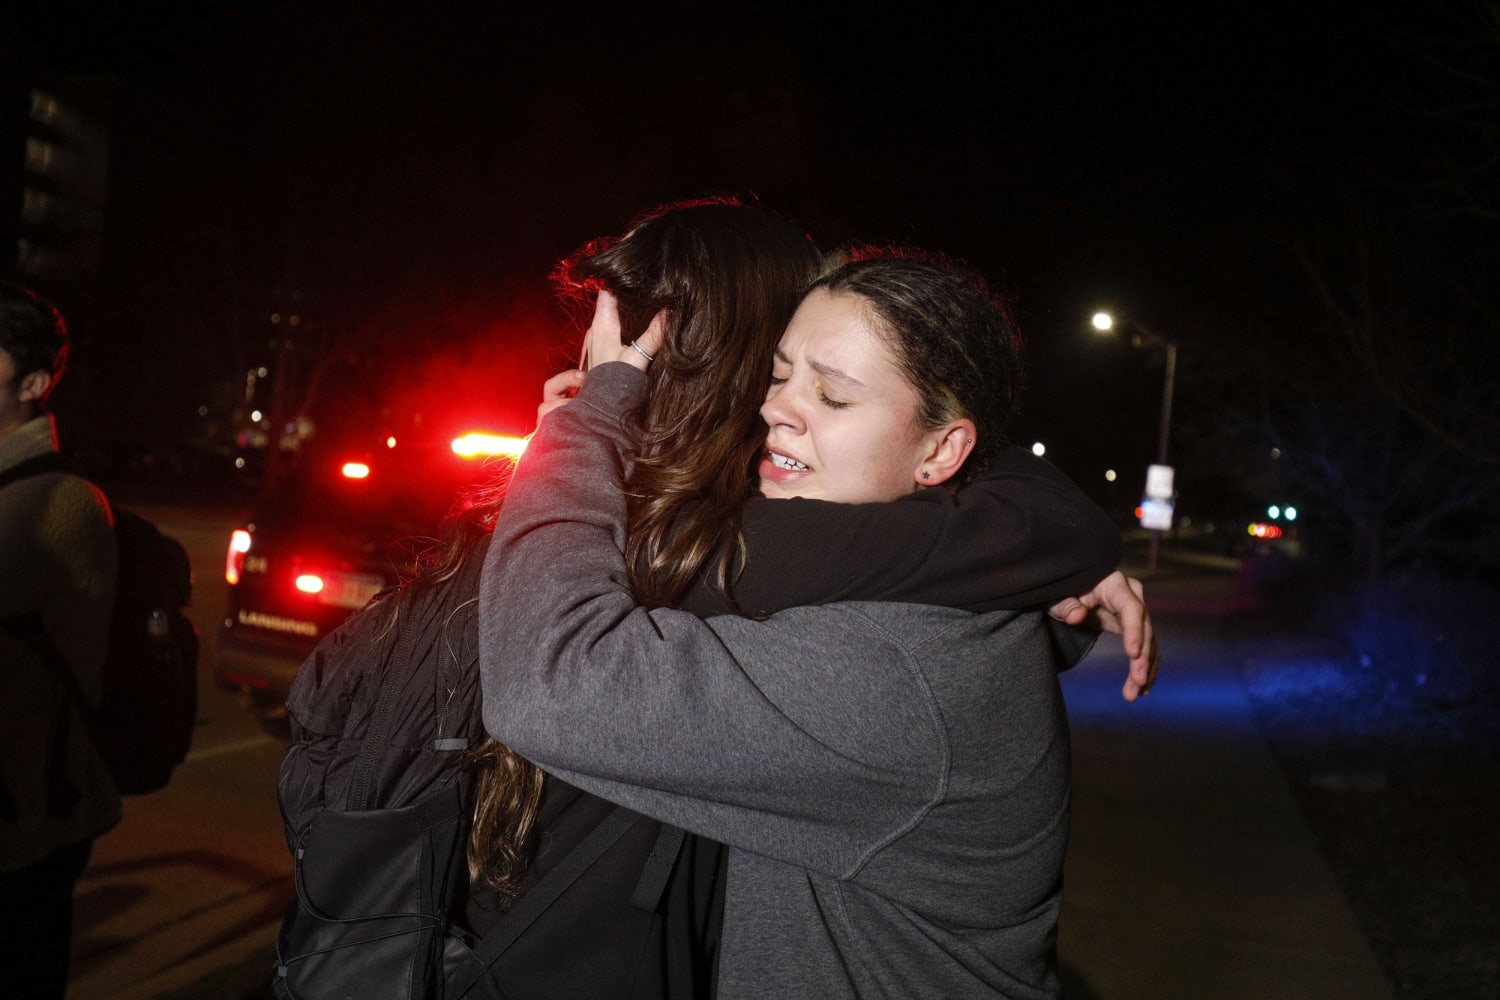 At least 3 killed and suspect dead after mass shooting at Michigan State University